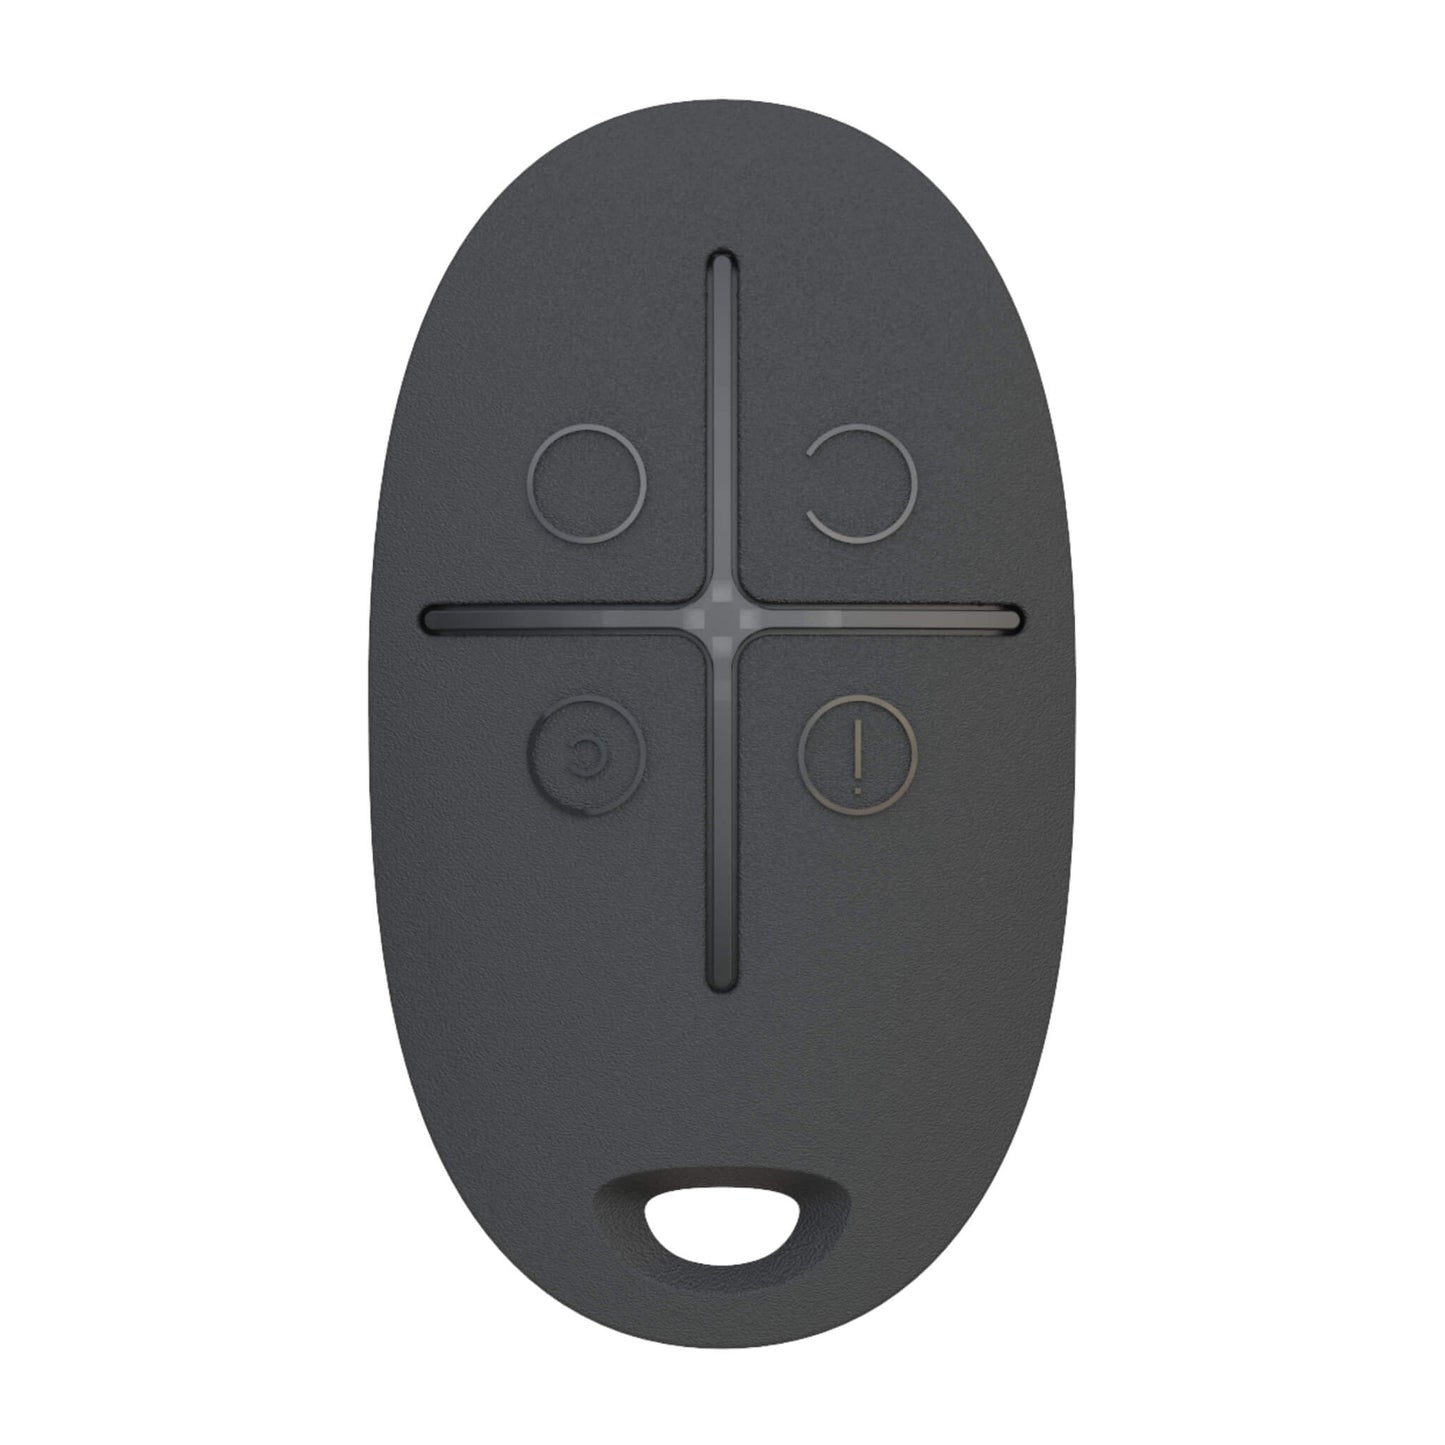 Black Ajax SpaceControl 4 button keyfob for arming and disarming of your Ajax Security System for business and home and security , 65 × 37 × 10 mm in size, 13 grams in weight, Front View of Device, rated IP50